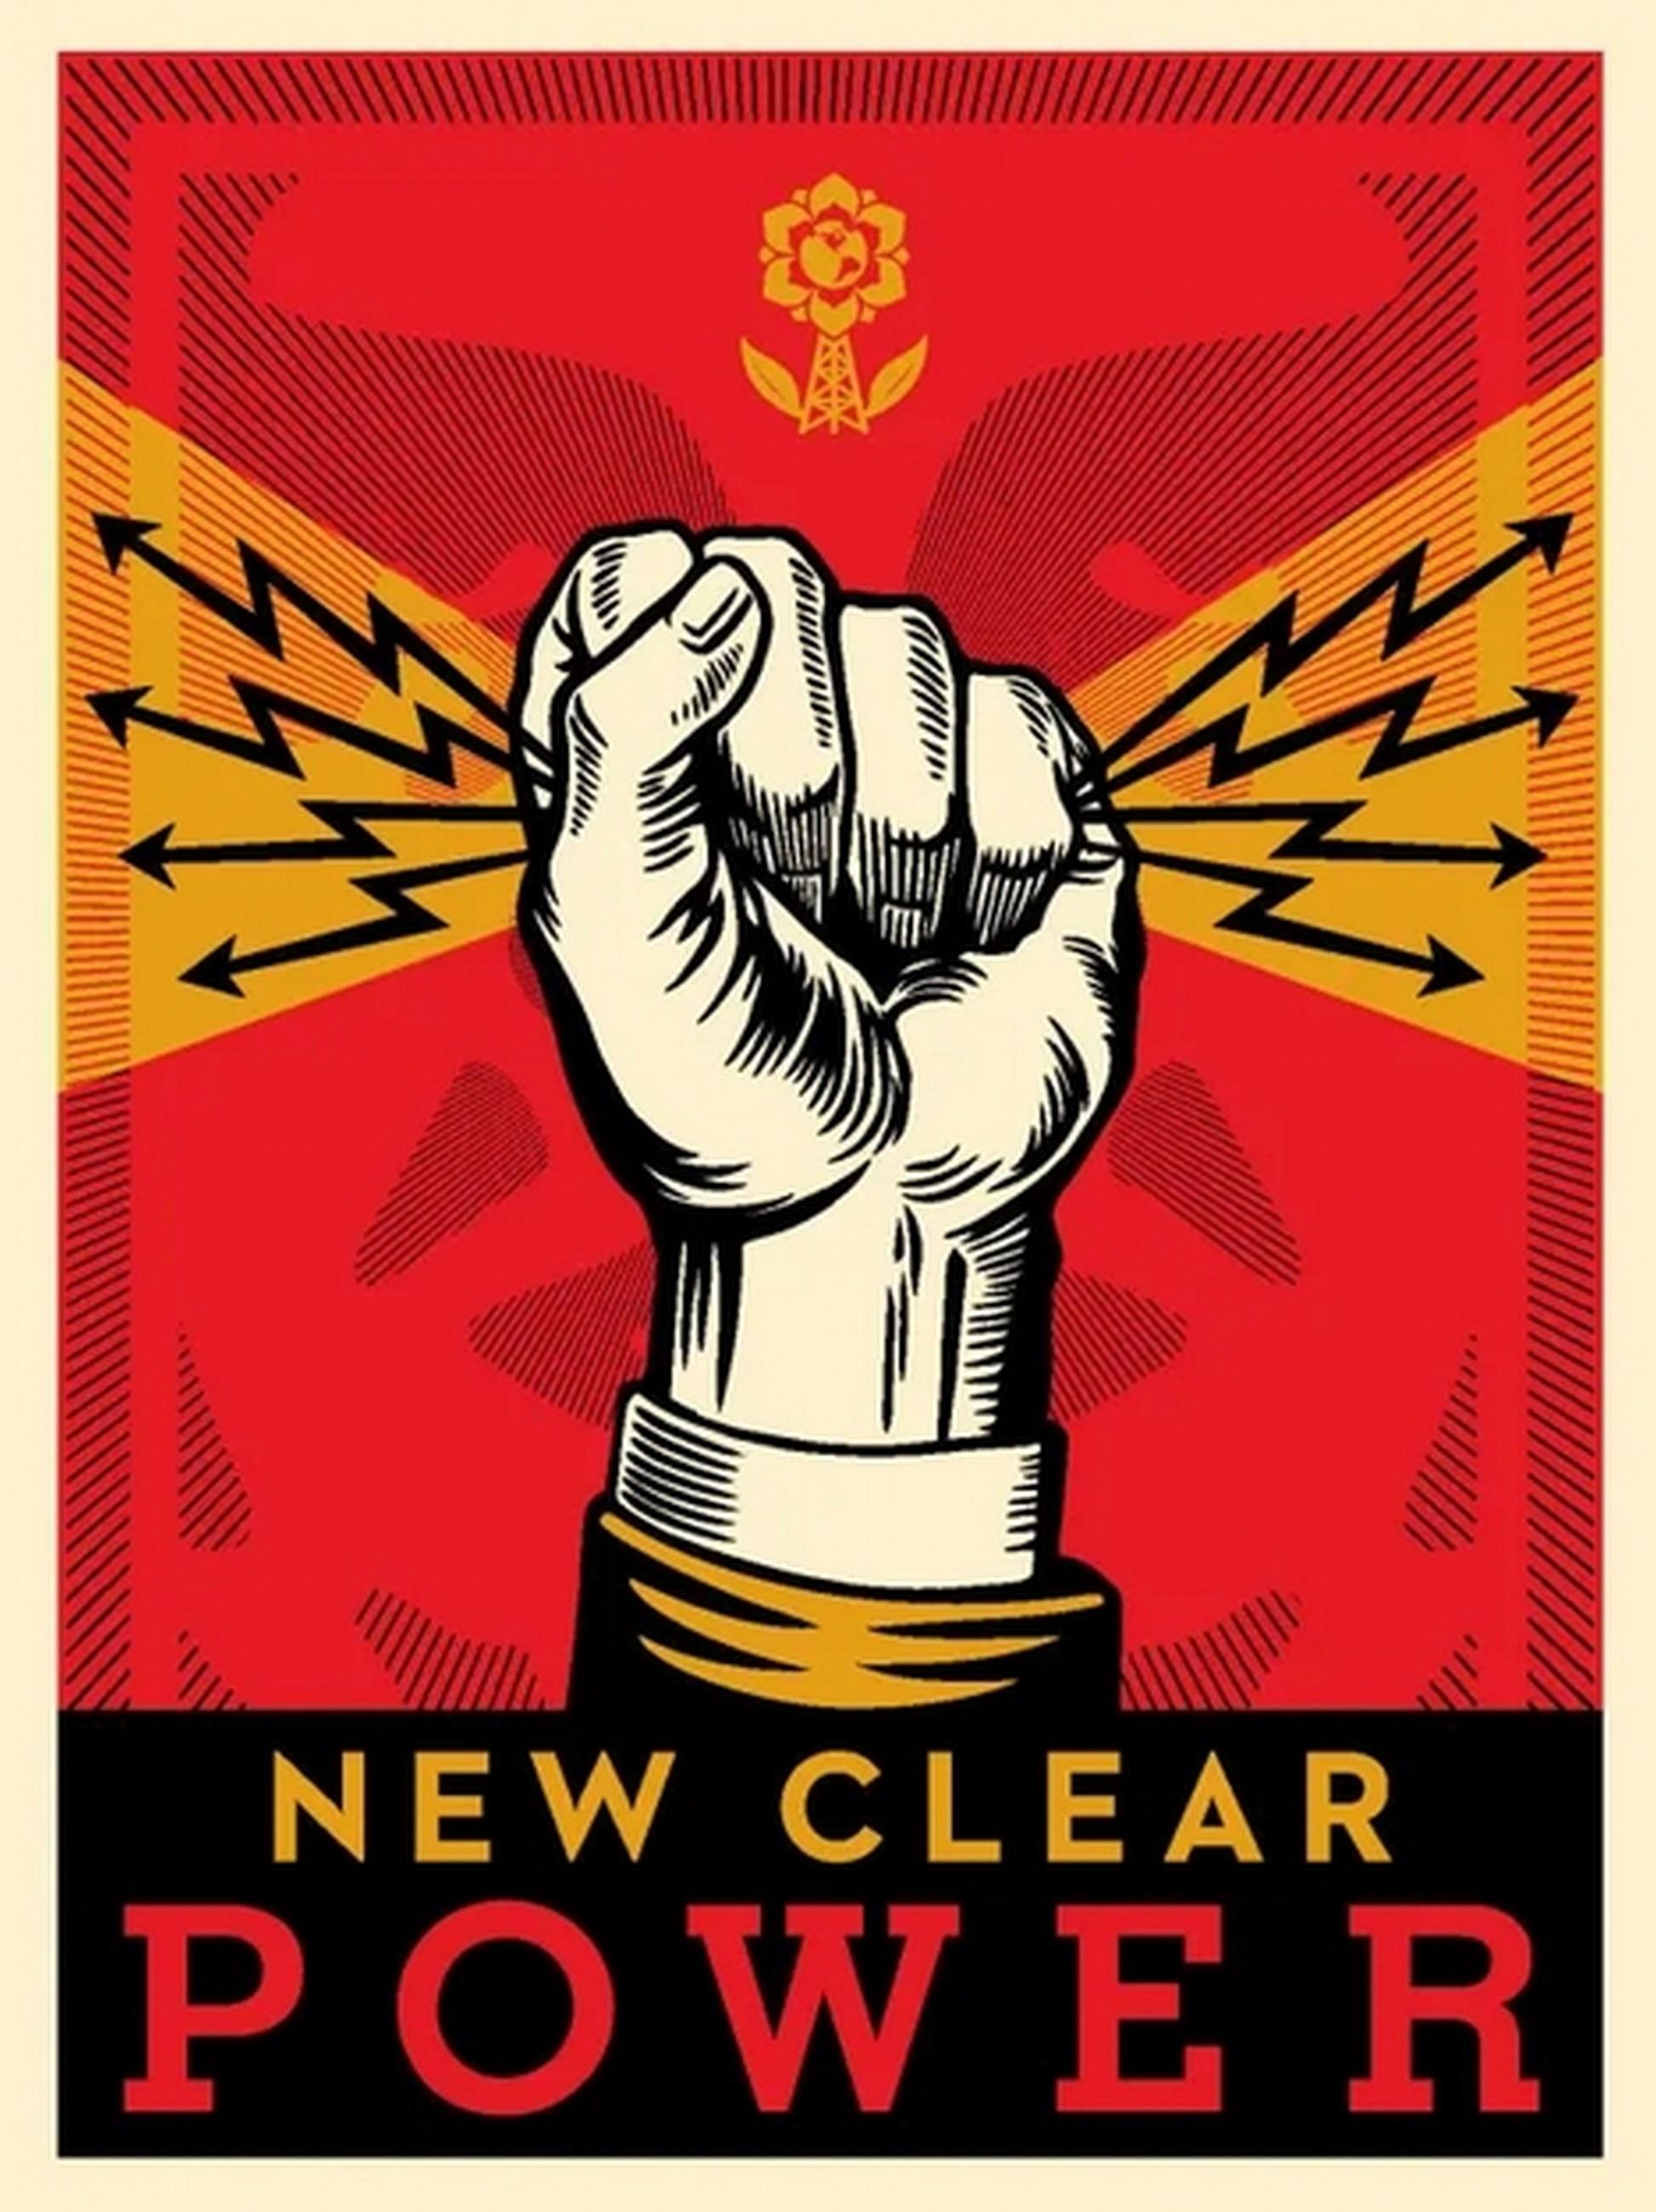 New Clear Power (Iconic, Renewable, Political, Creativity, Information, News) - Print by Shepard Fairey